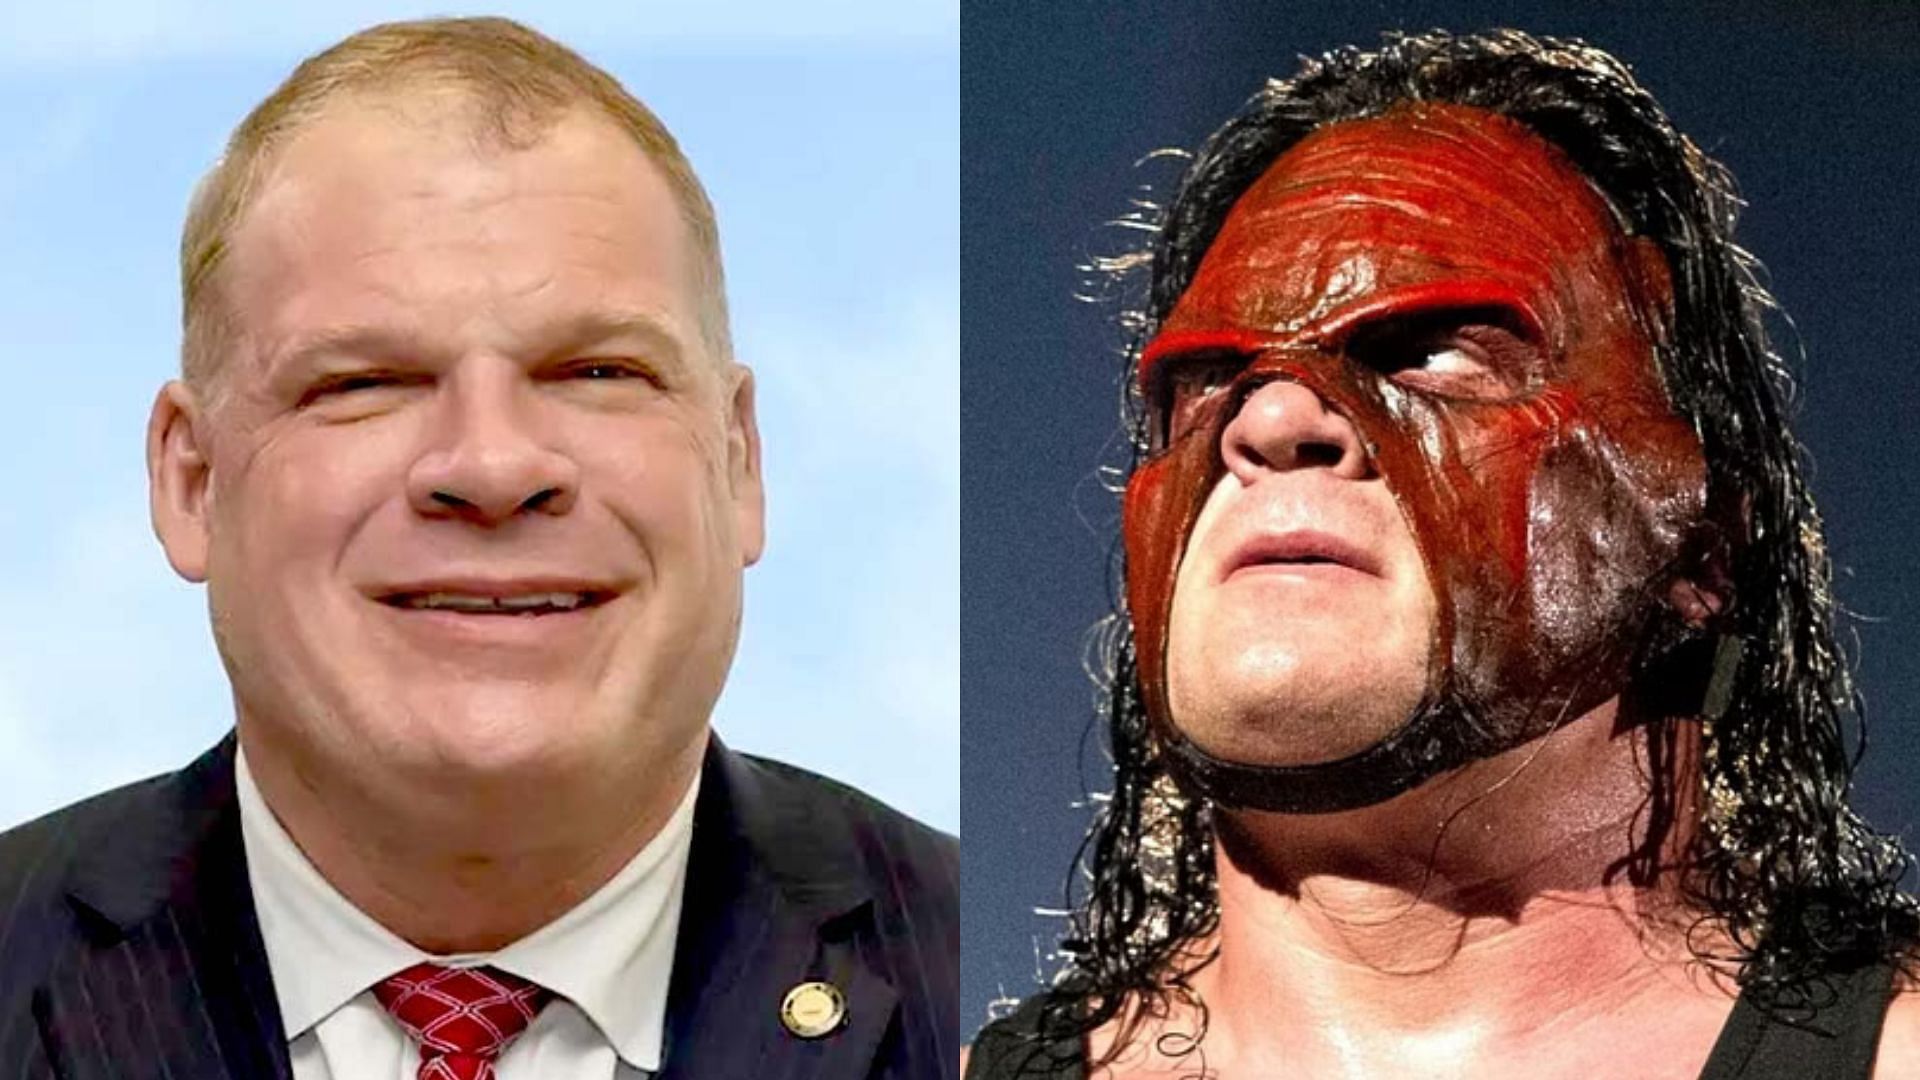 The Big Red Machine is now a politician.